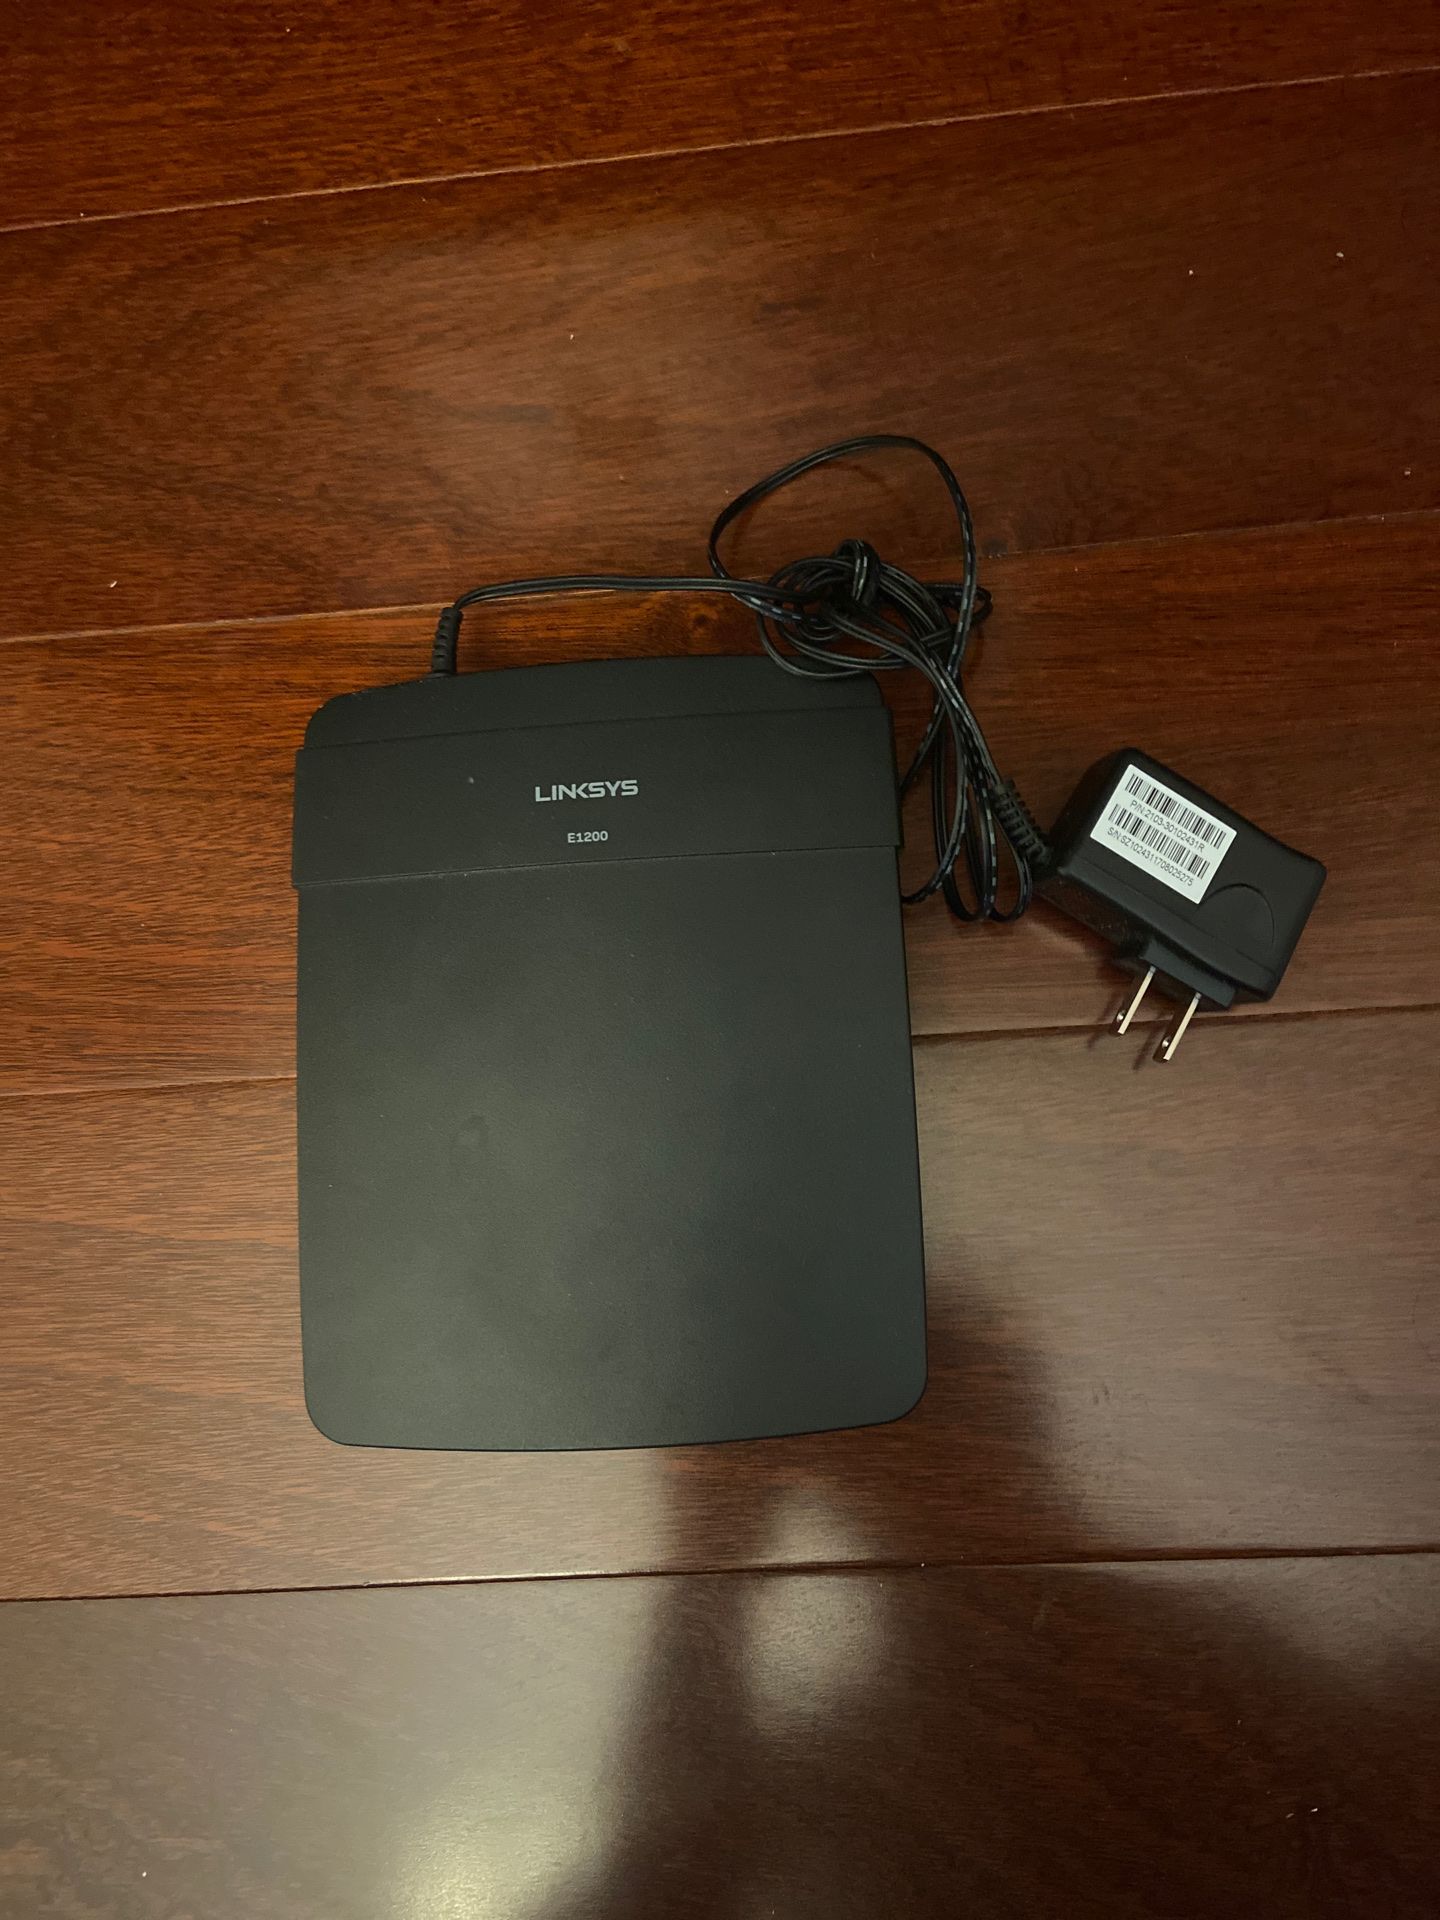 Linksys E1200 wireless router